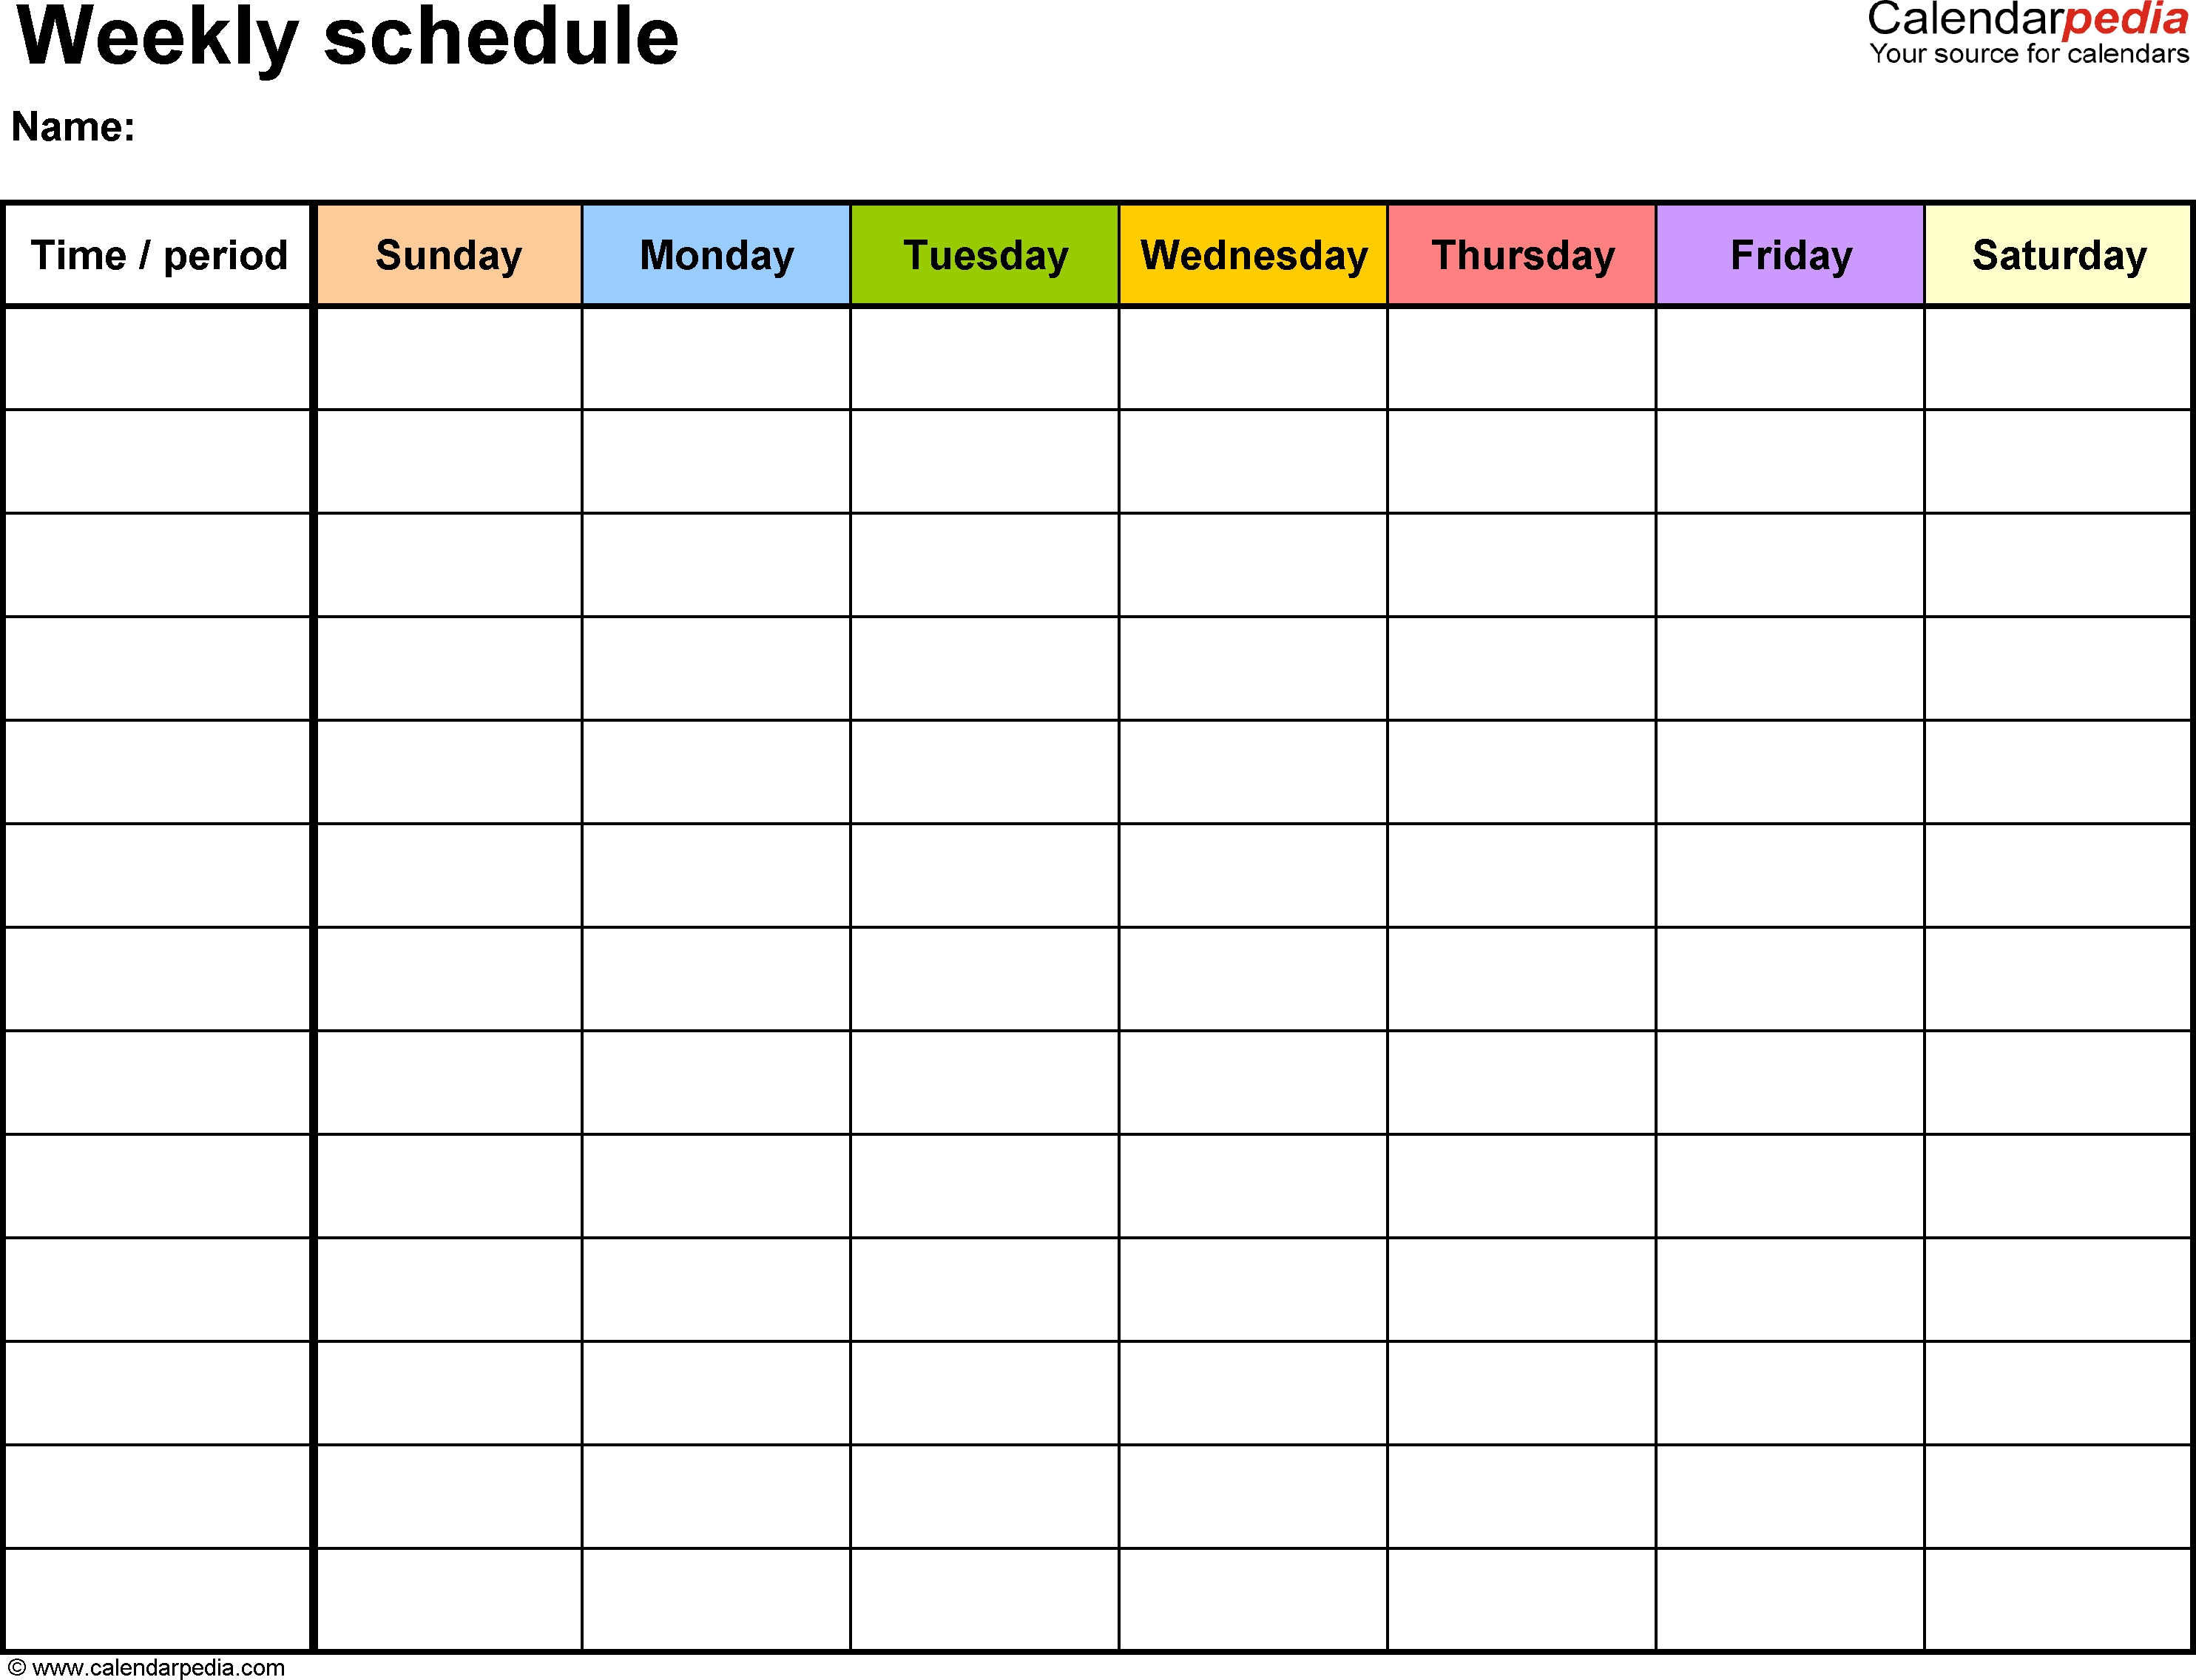 Free Weekly Schedule Templates For Excel - 18 Templates with Plan Calendar Template For 6 Weeks